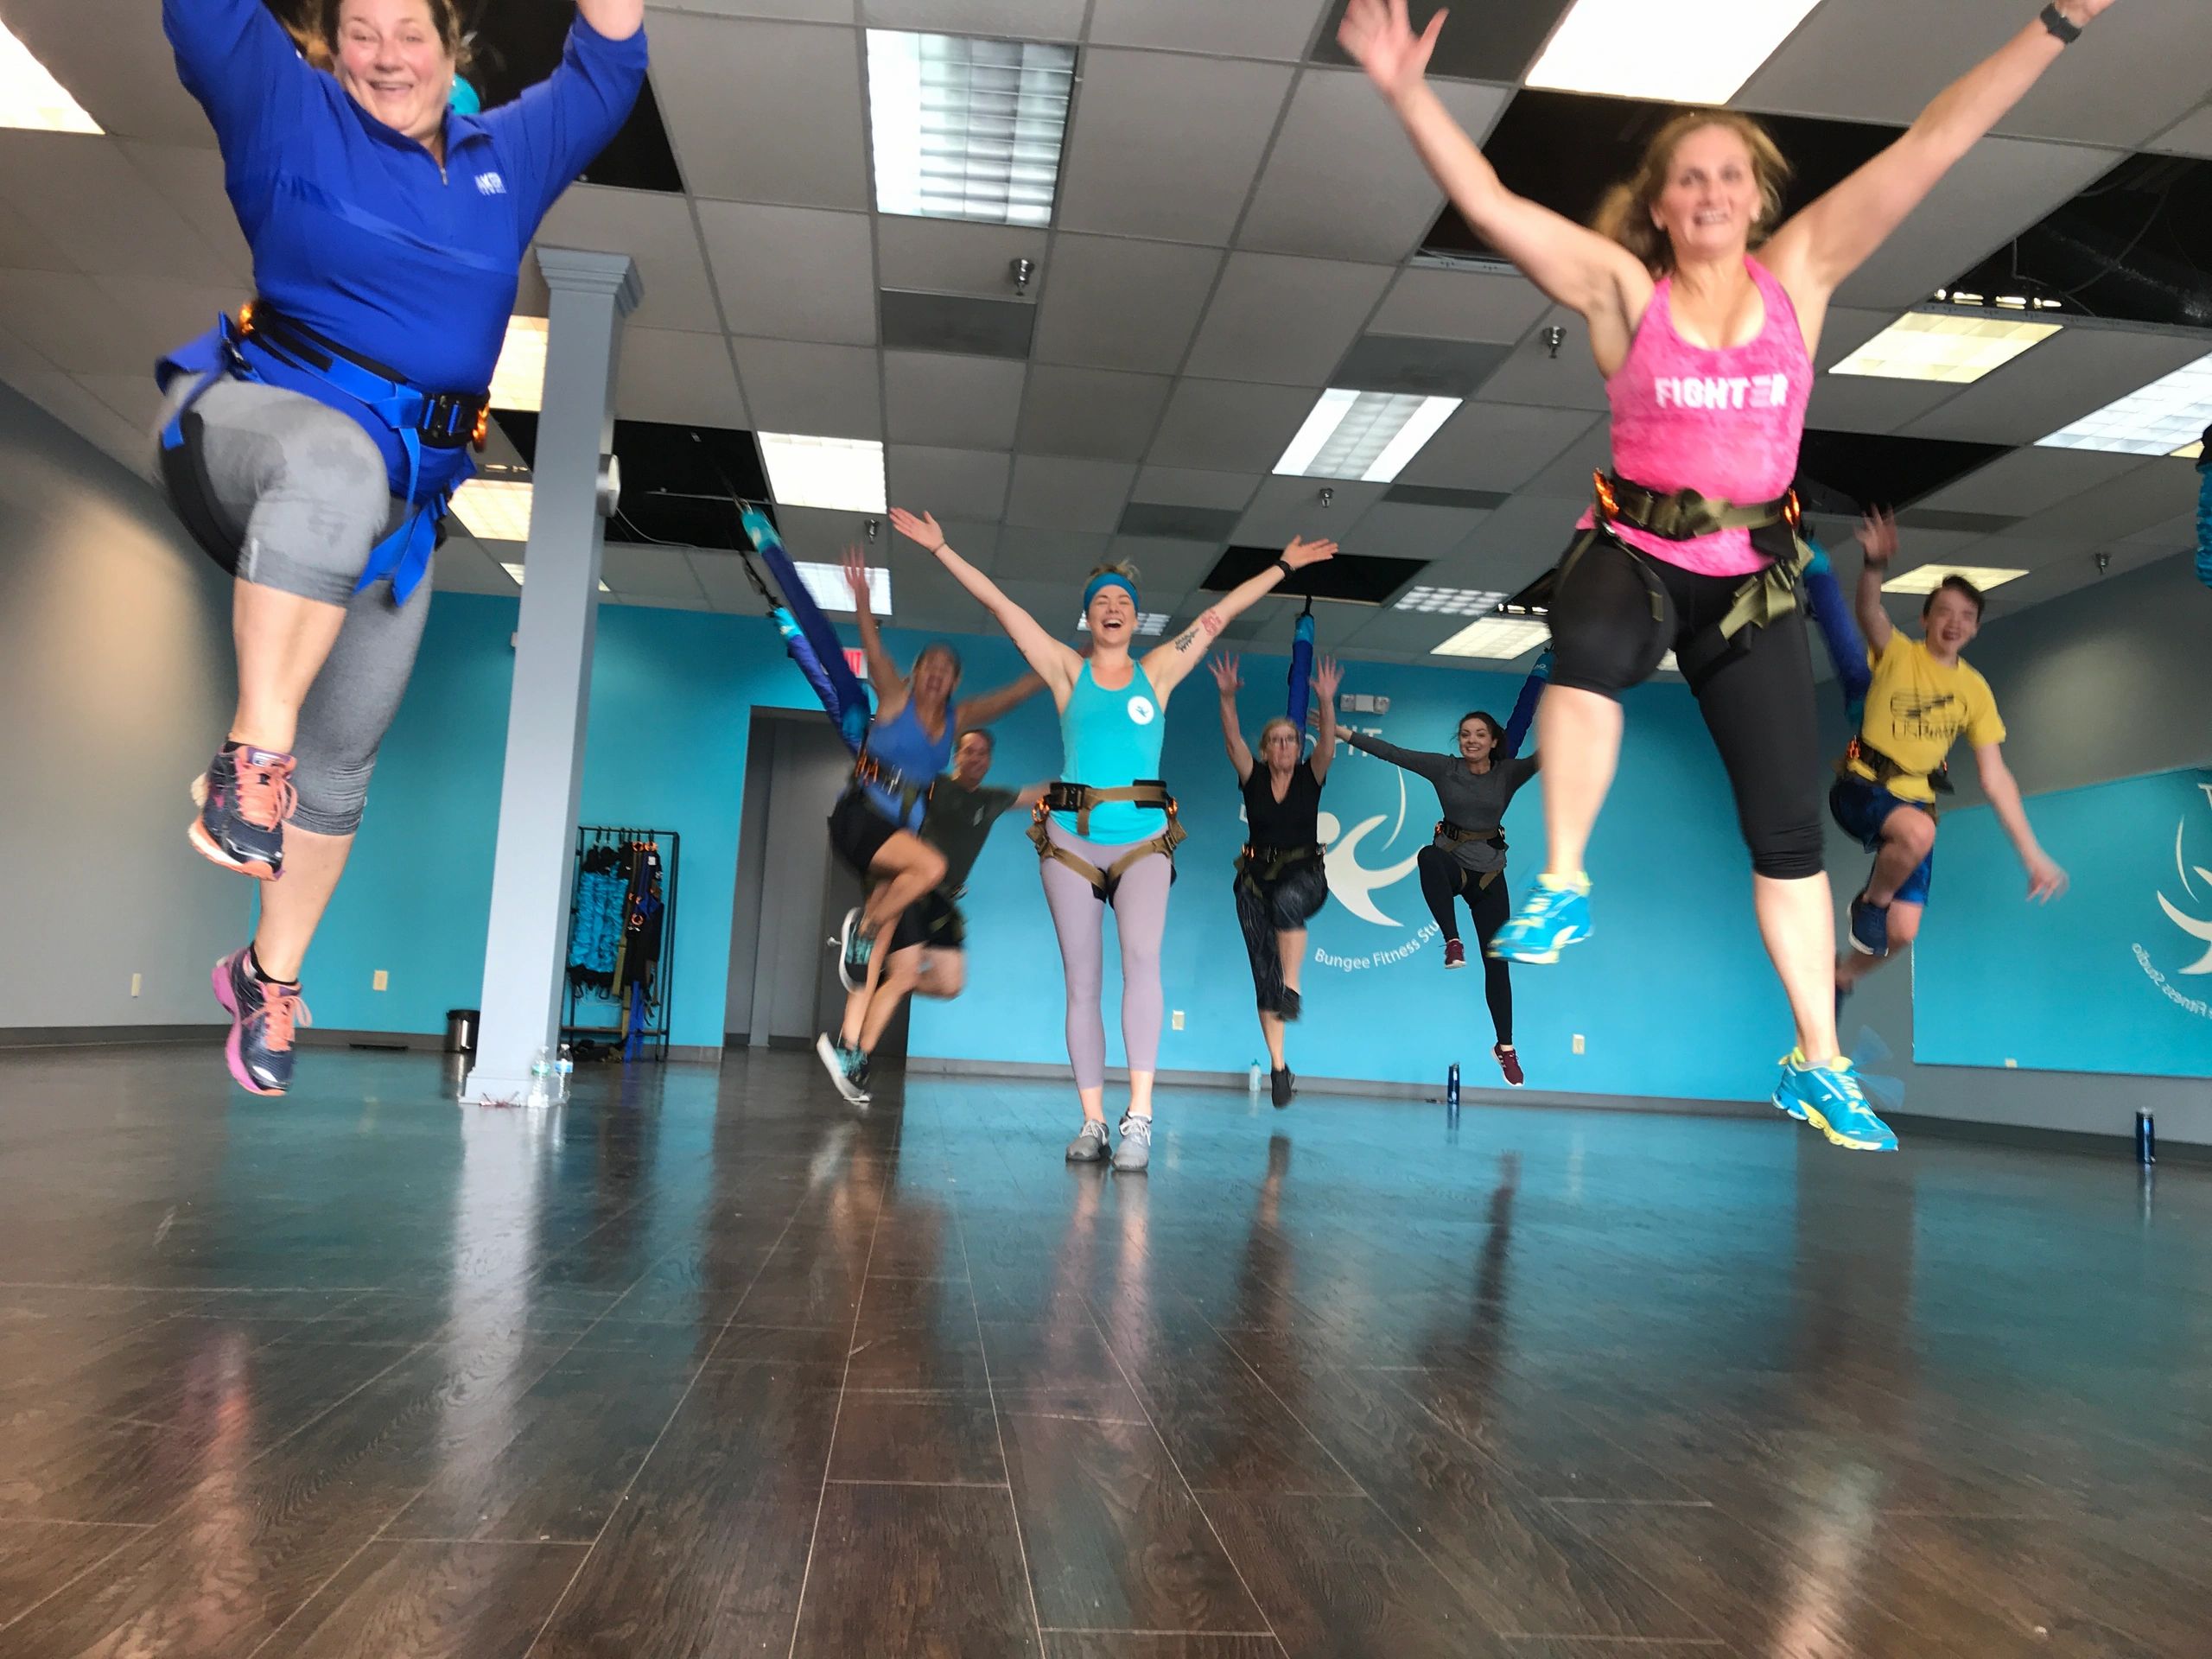 launch bungee fitness classes near me - Cares If Vodcast Image Library